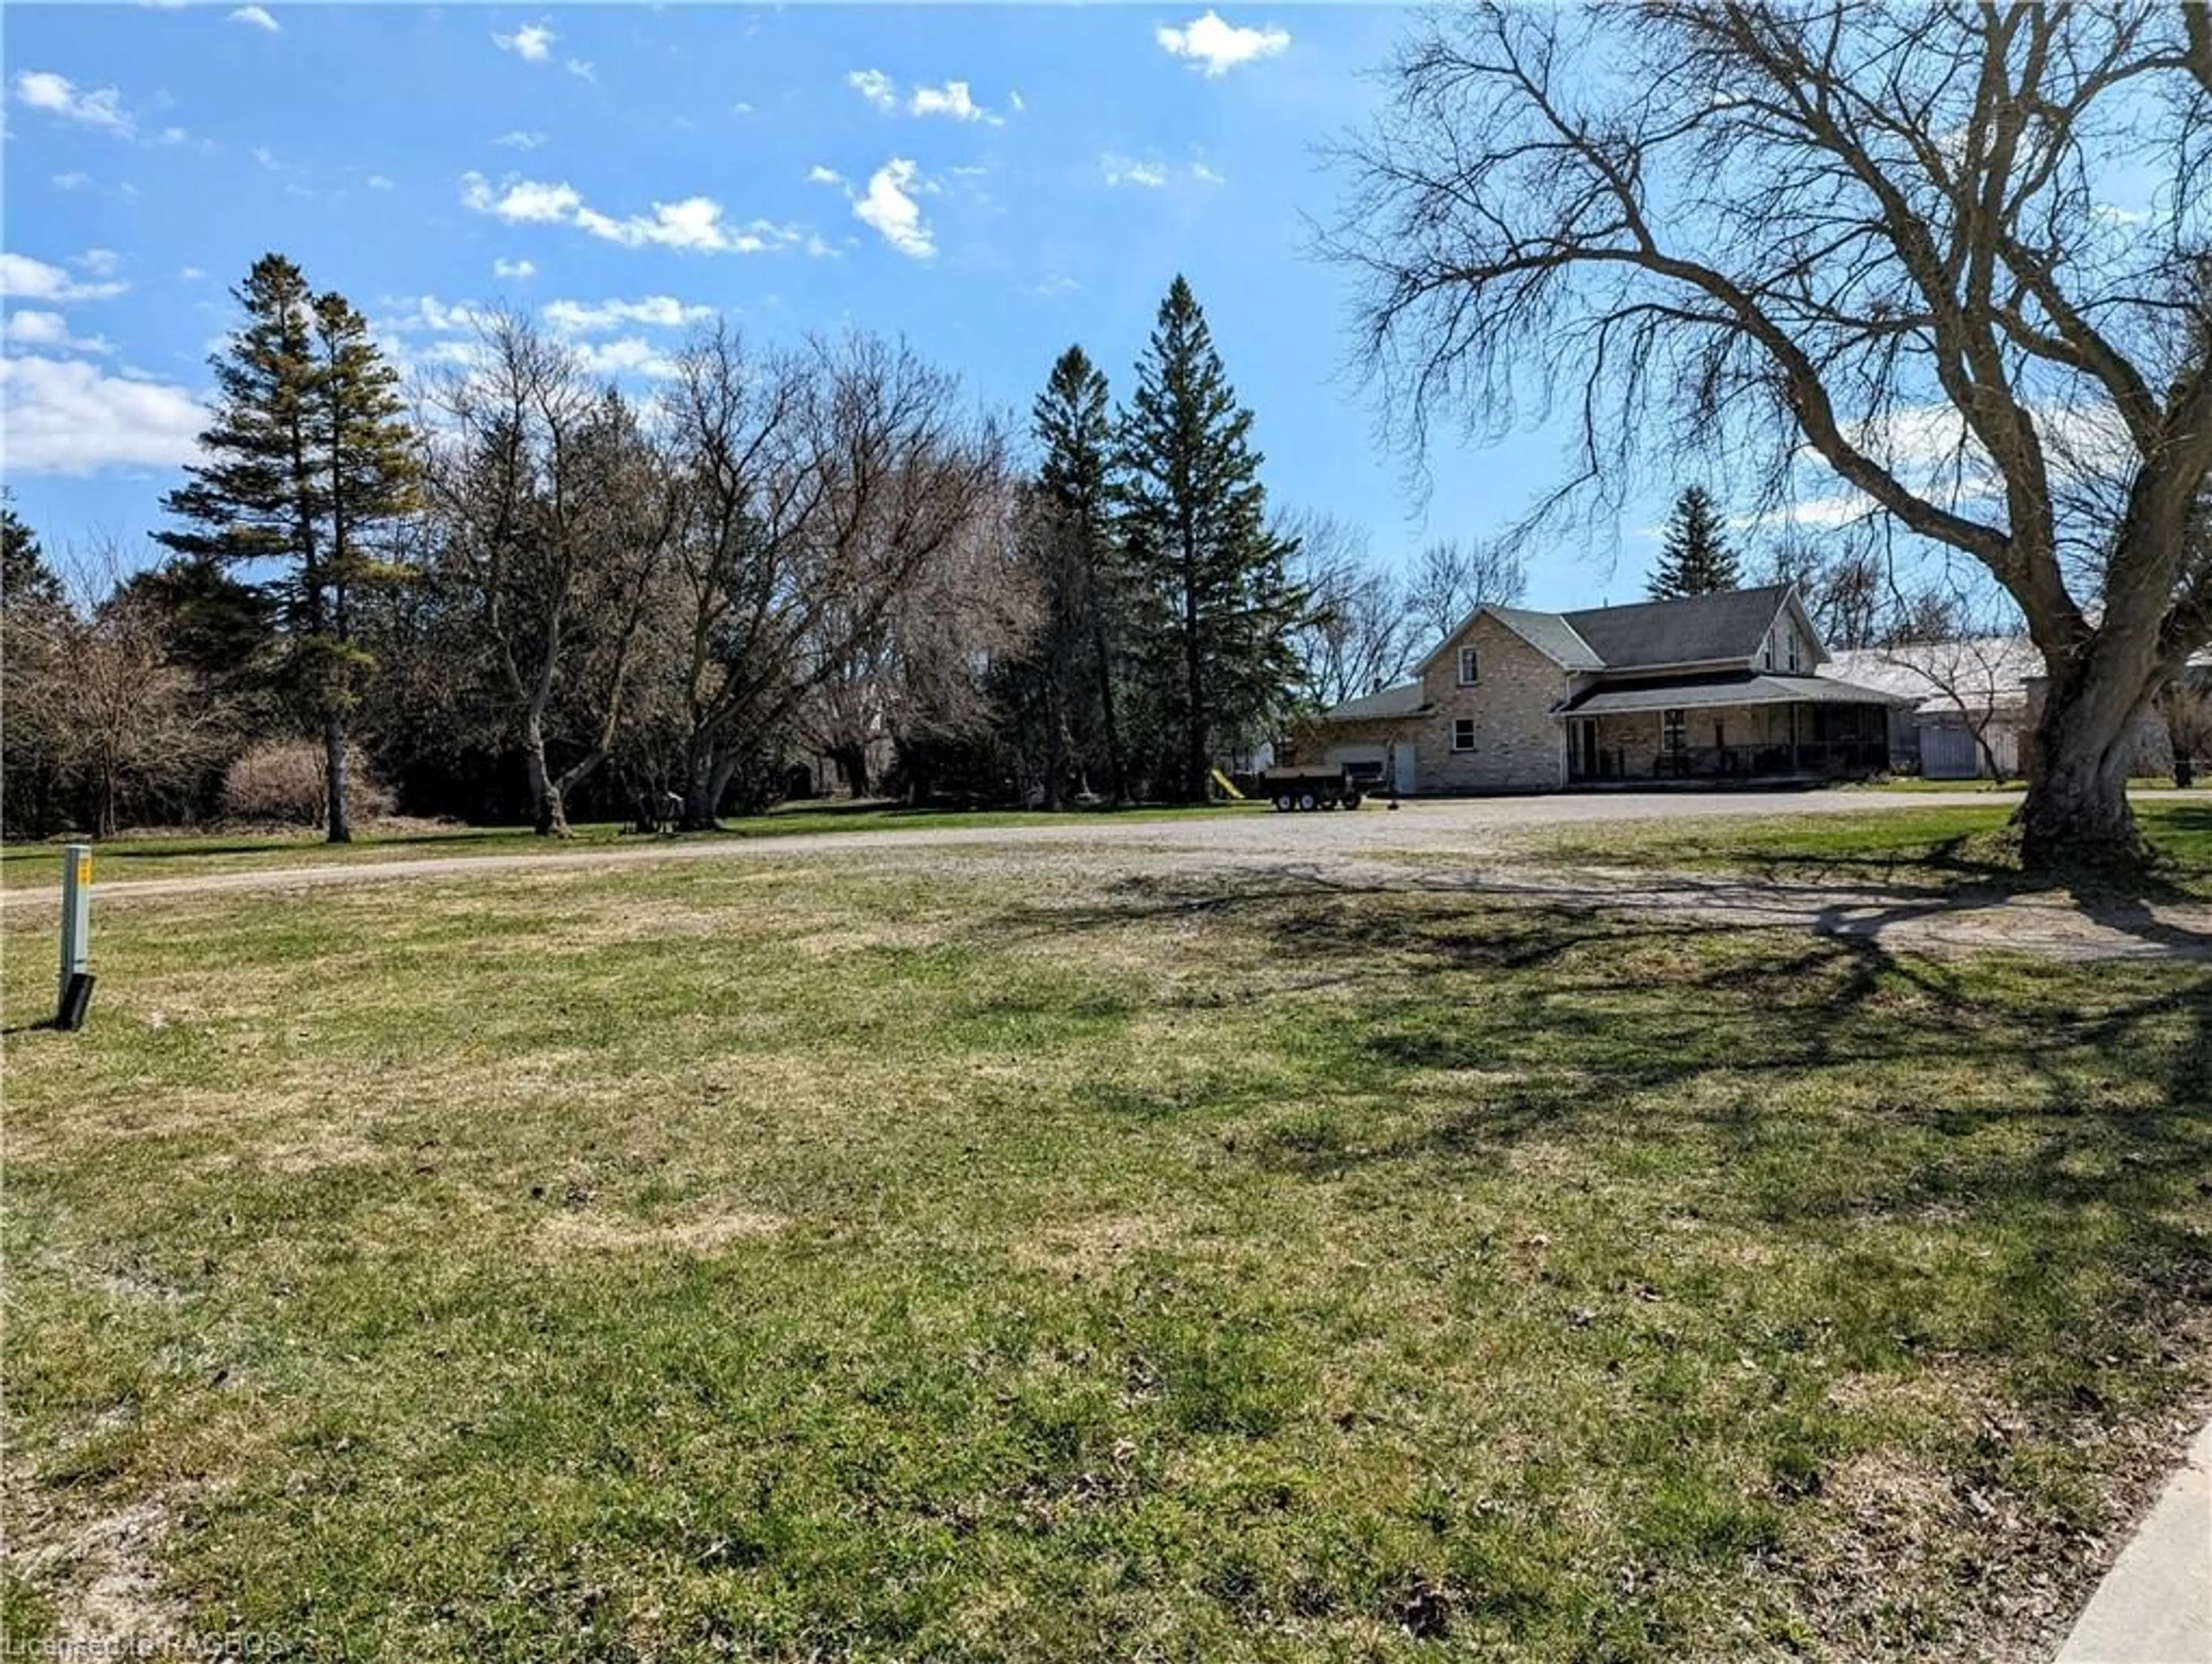 Fenced yard for 60 Ross St, Tiverton Ontario N0G 2T0